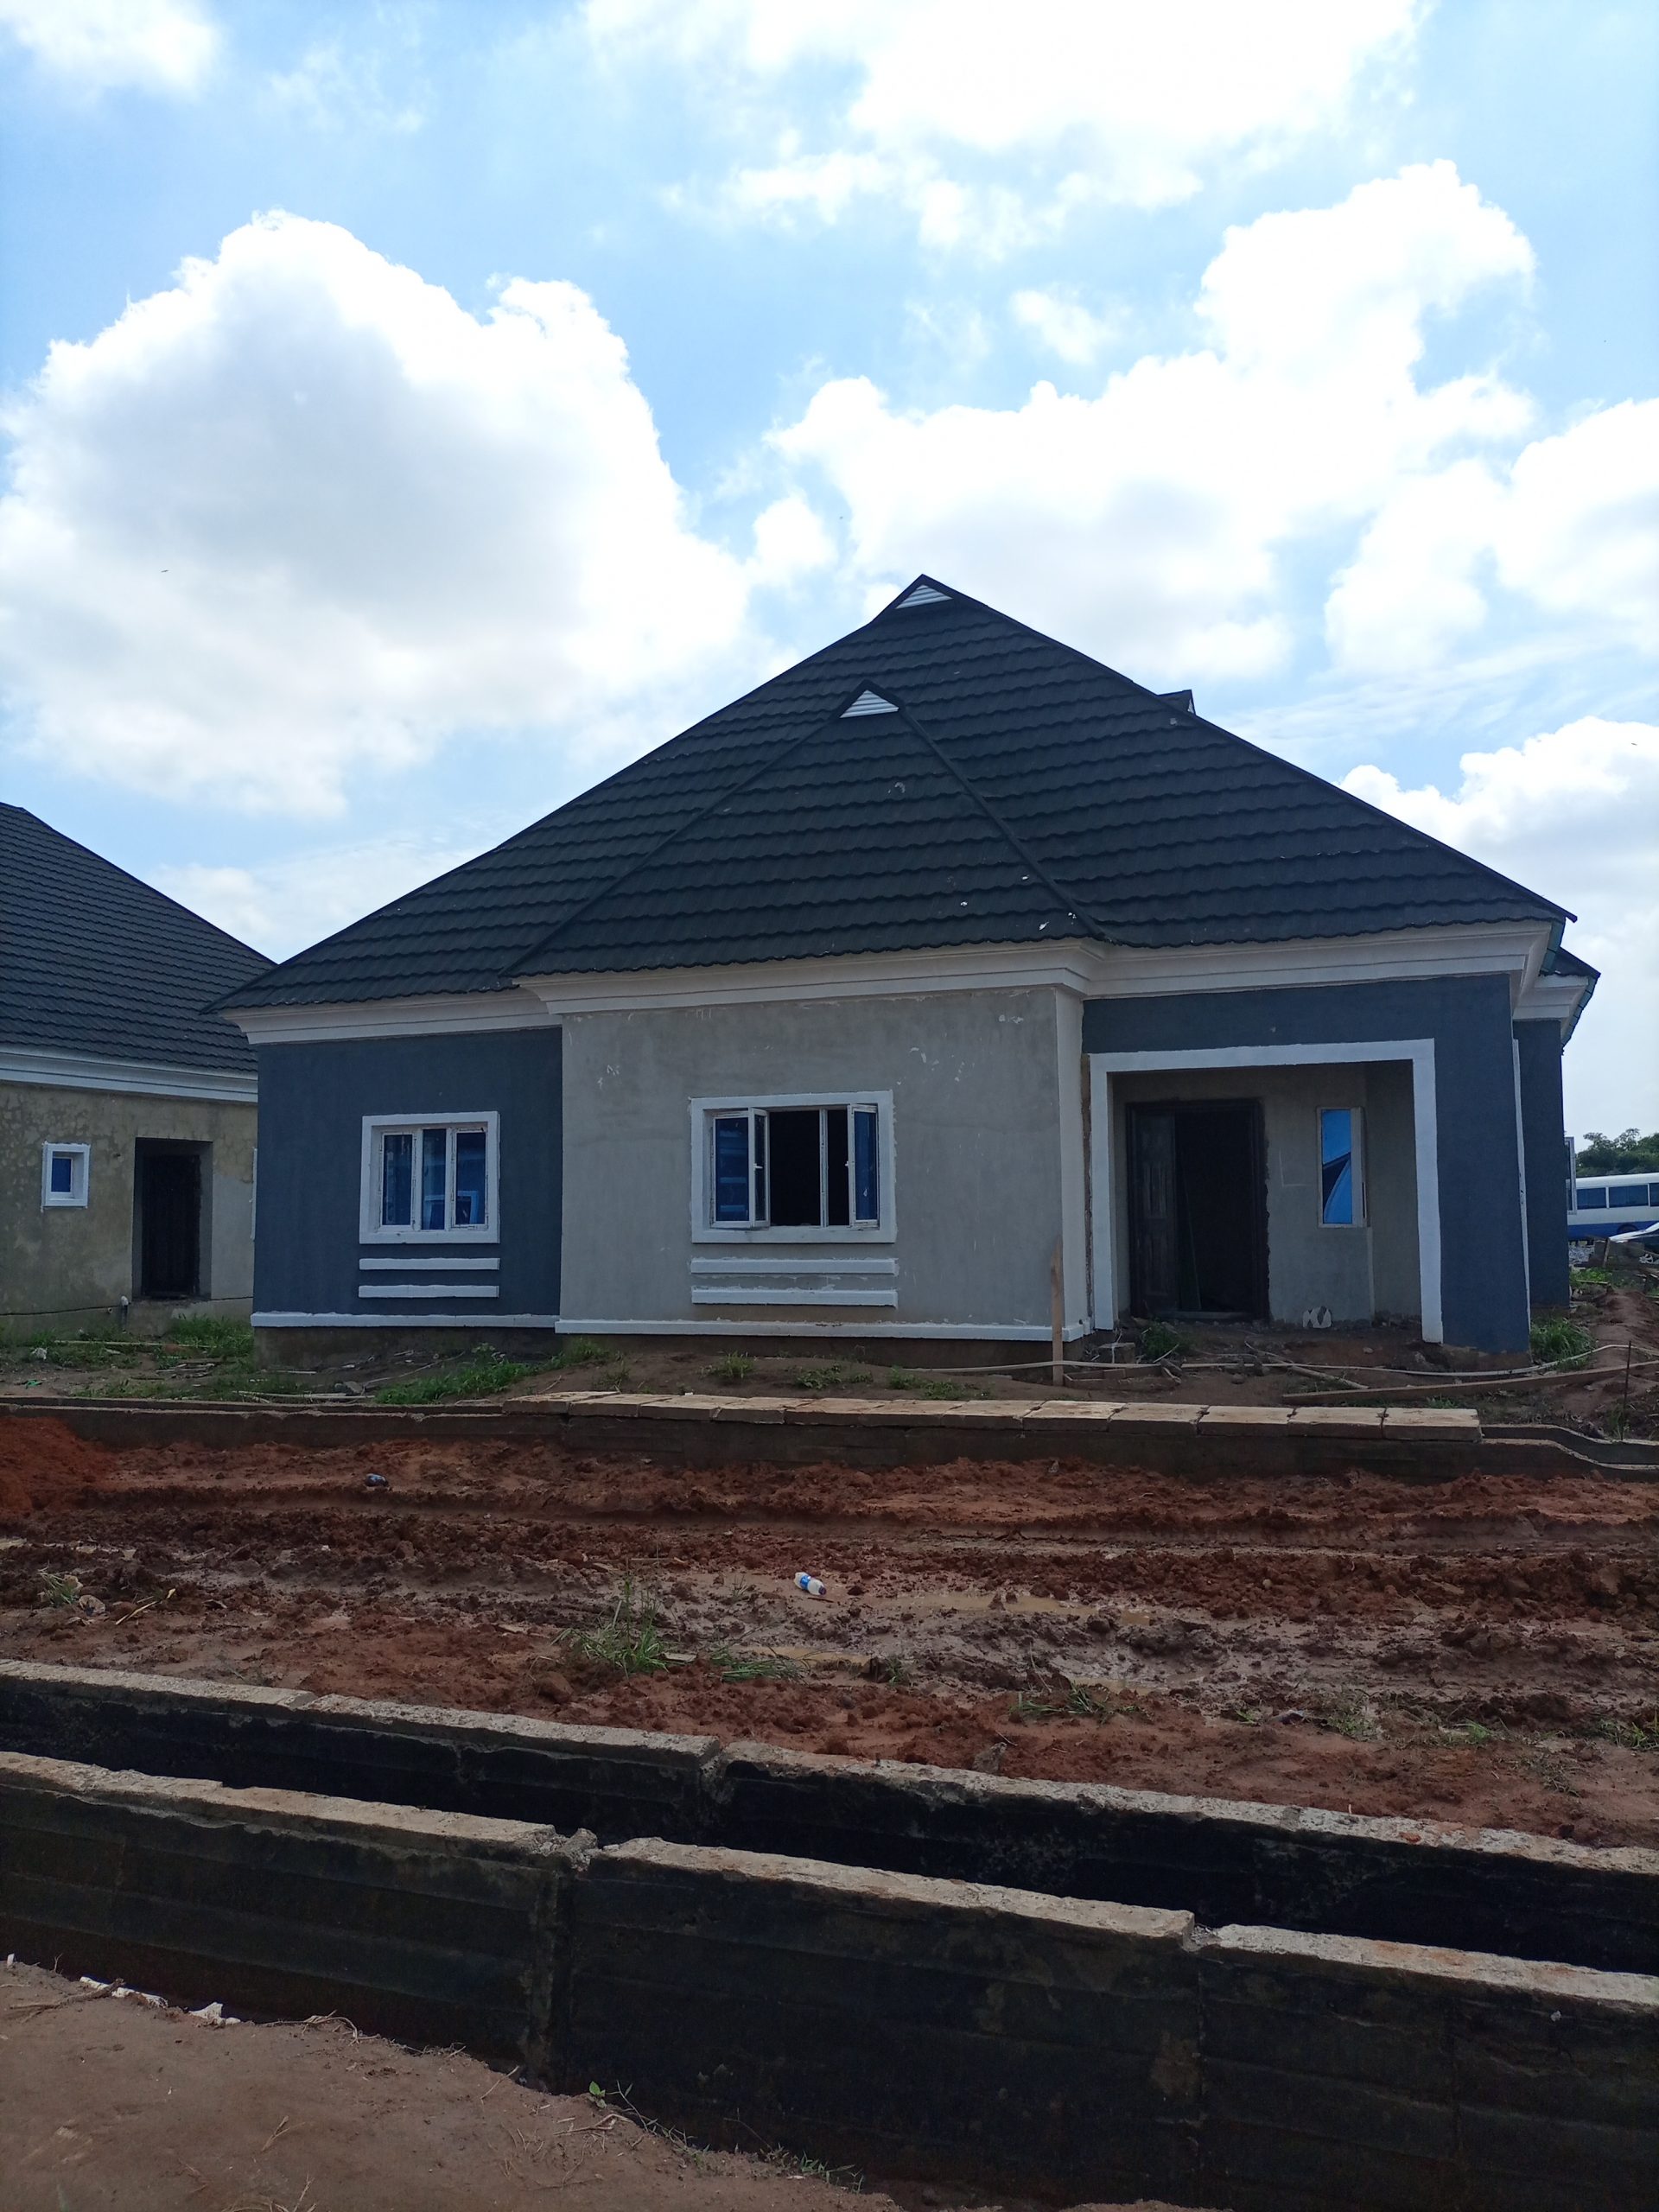 3 Bedroom Bungalow, For Sale in Mowe, Before RCCG Camp,modern roofing design and finishing with monthly installment payment